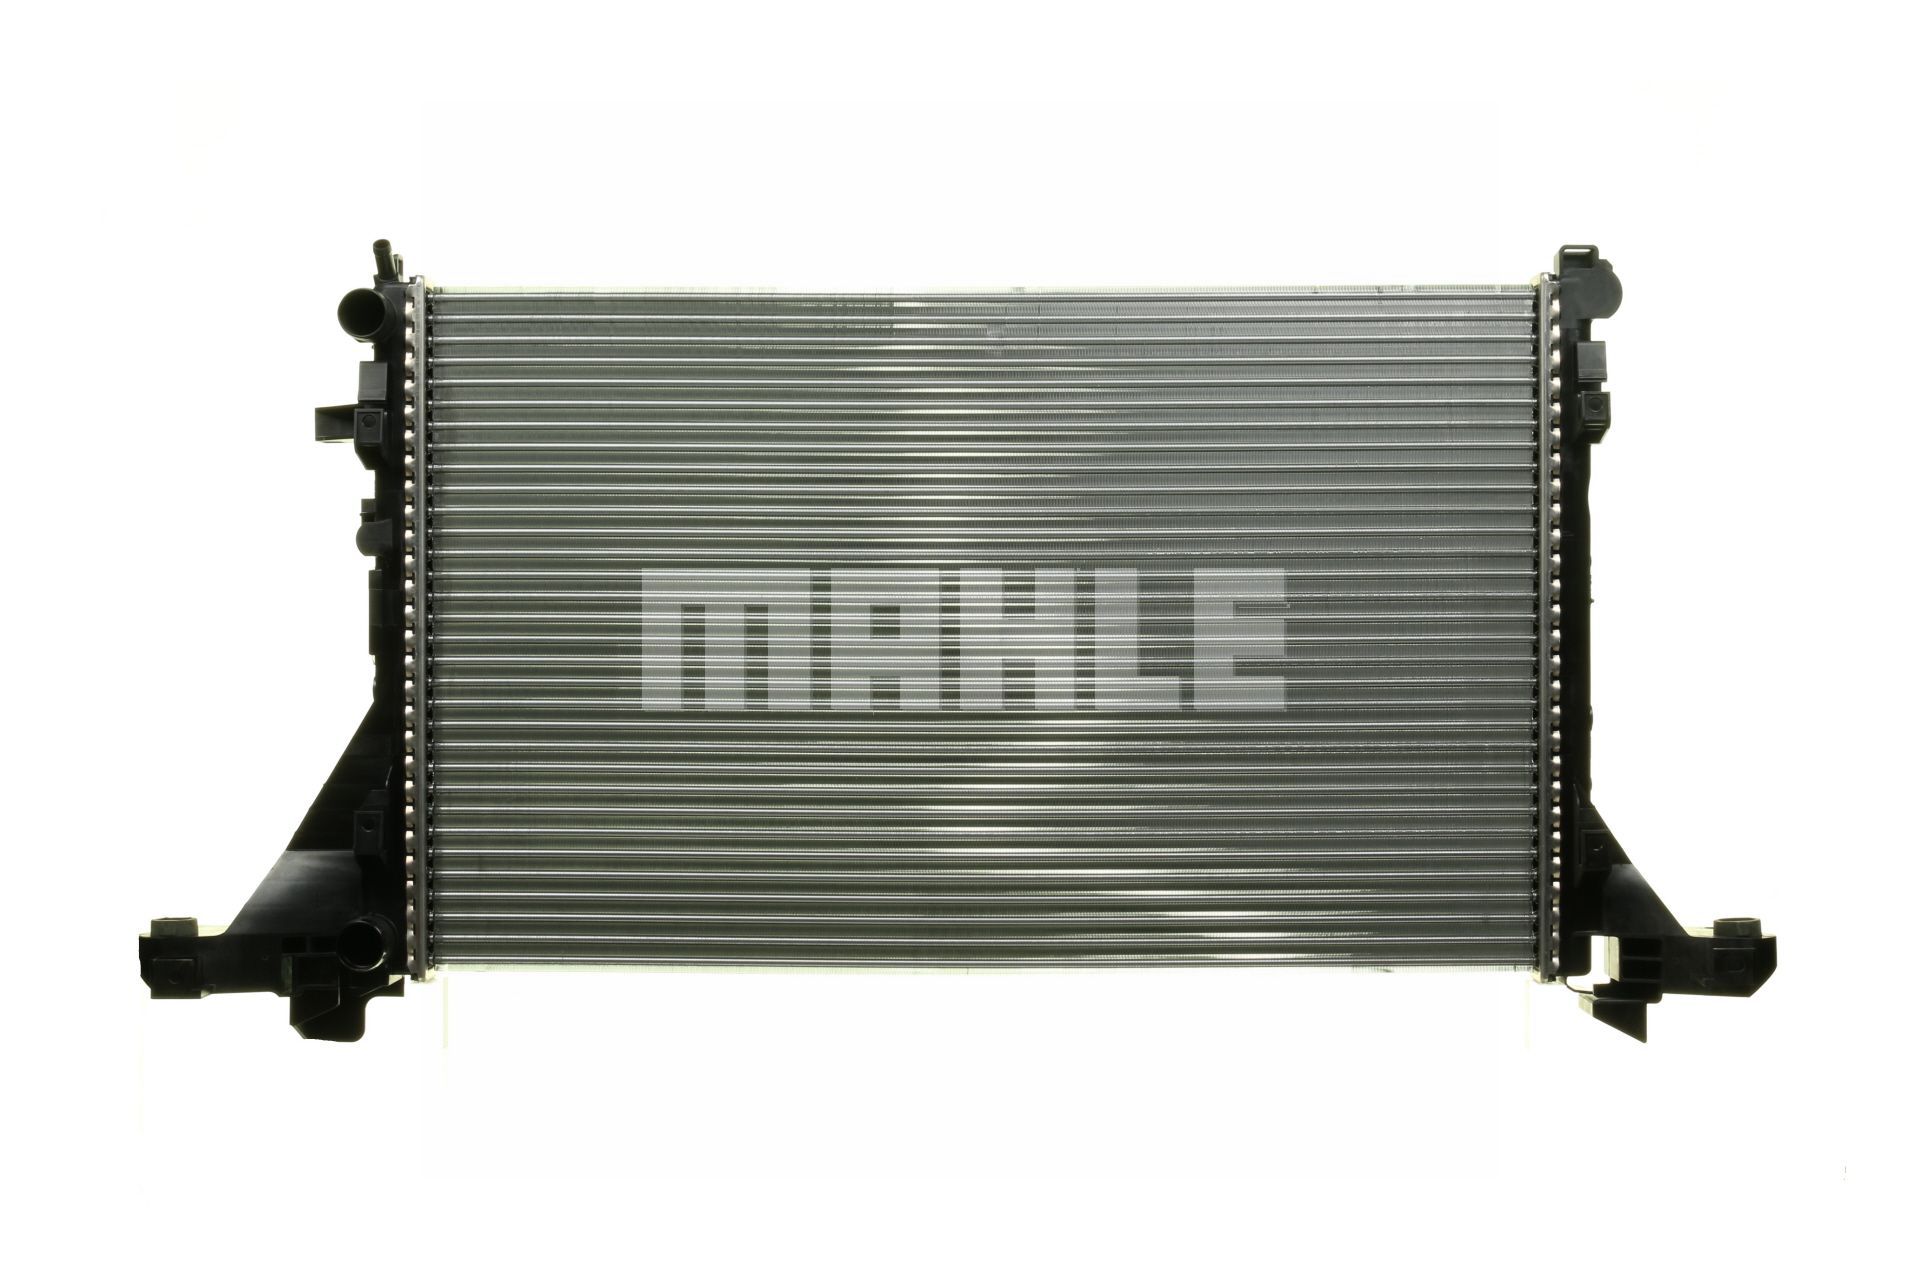 MAHLE ORIGINAL CR 1771 000P Engine radiator for vehicles without air conditioning, 776 x 480 x 26 mm, Mechanically jointed cooling fins